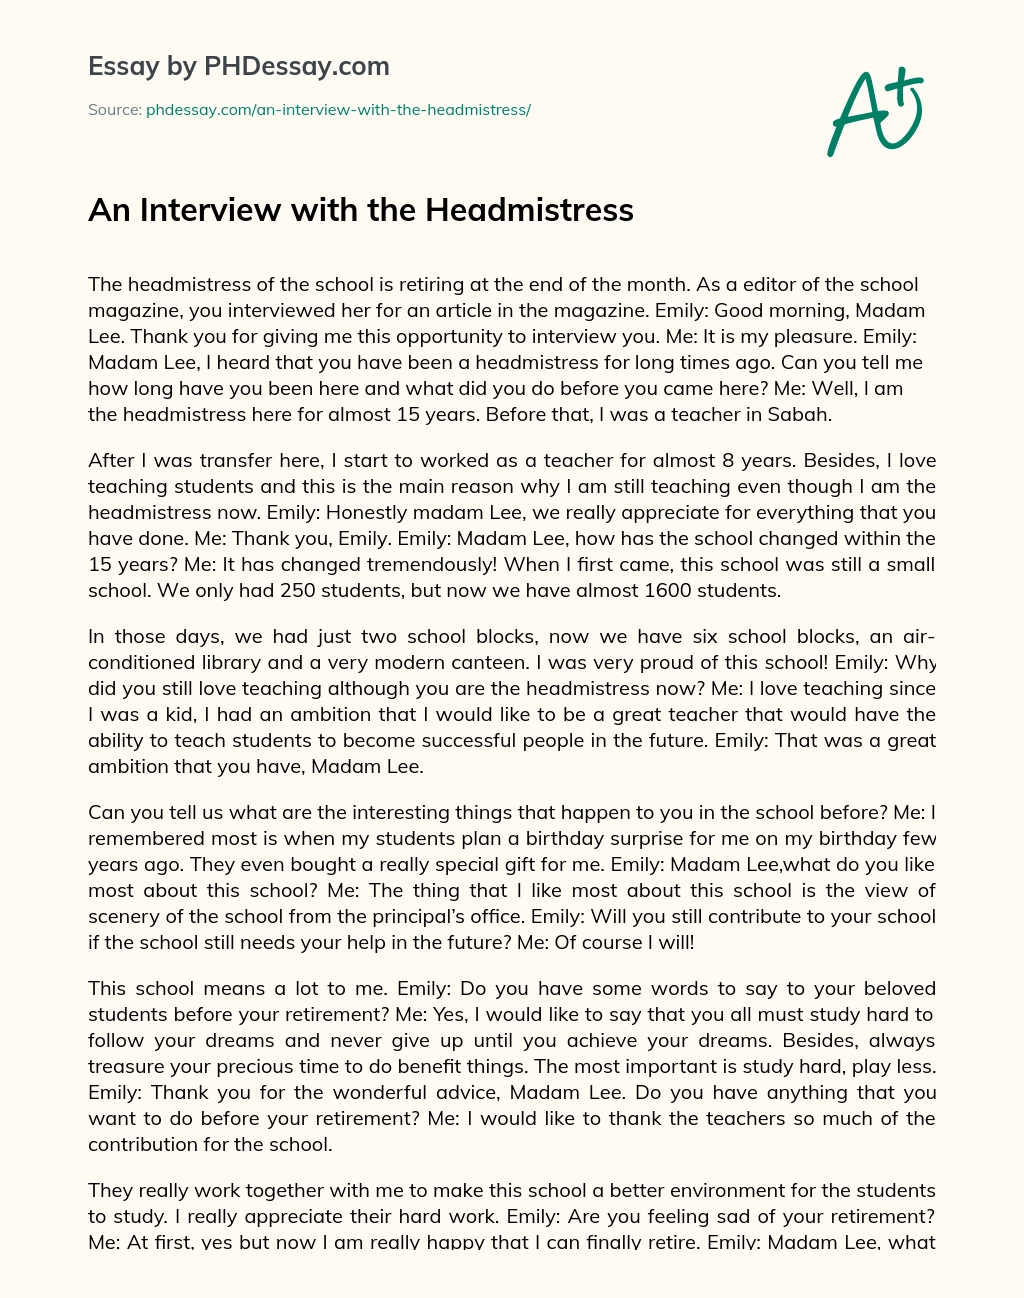 An Interview with the Headmistress essay